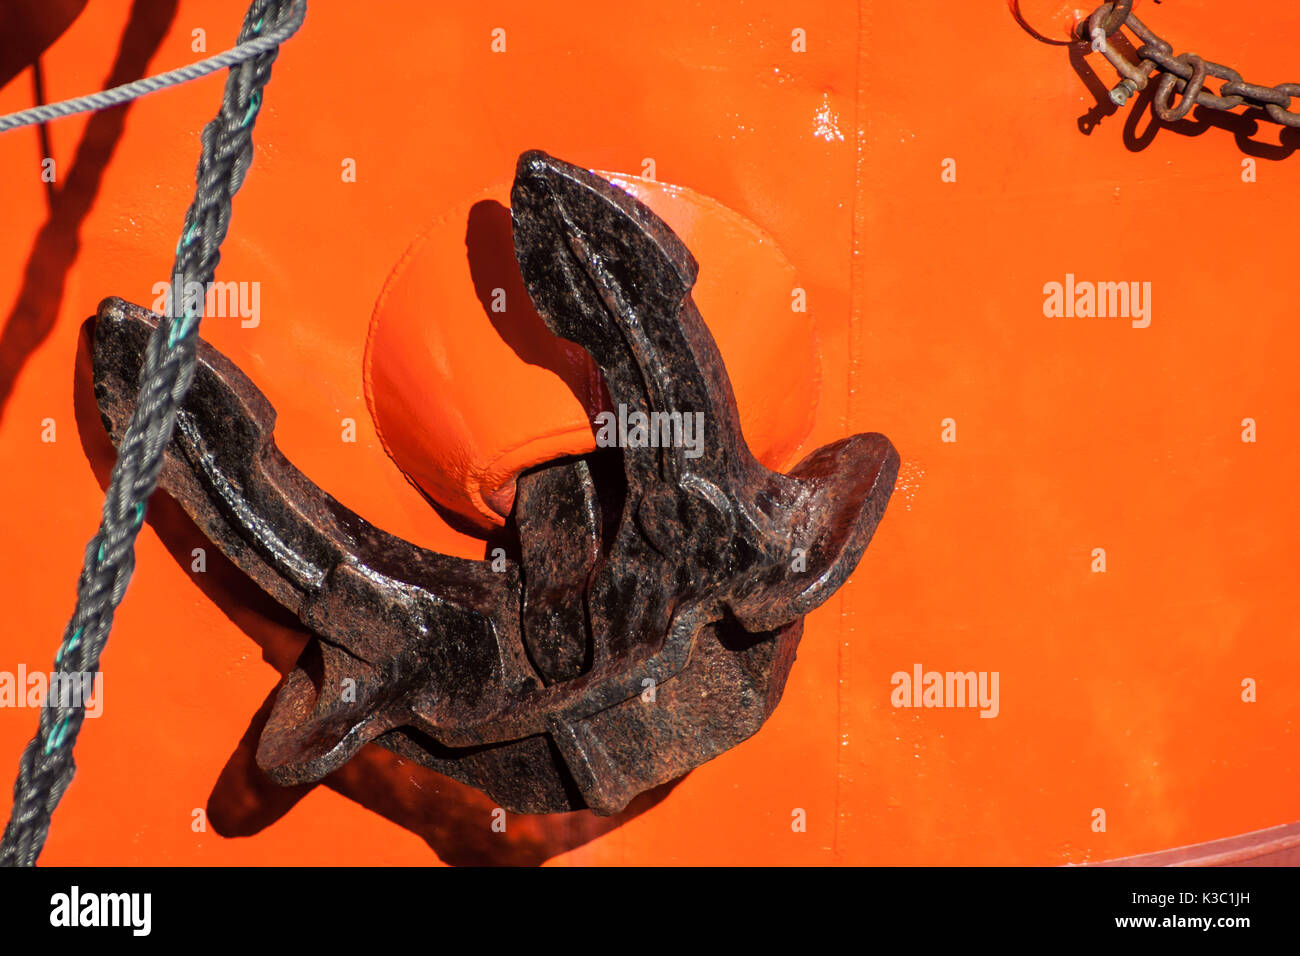 Red tugboat close up black anchor detail Stock Photo